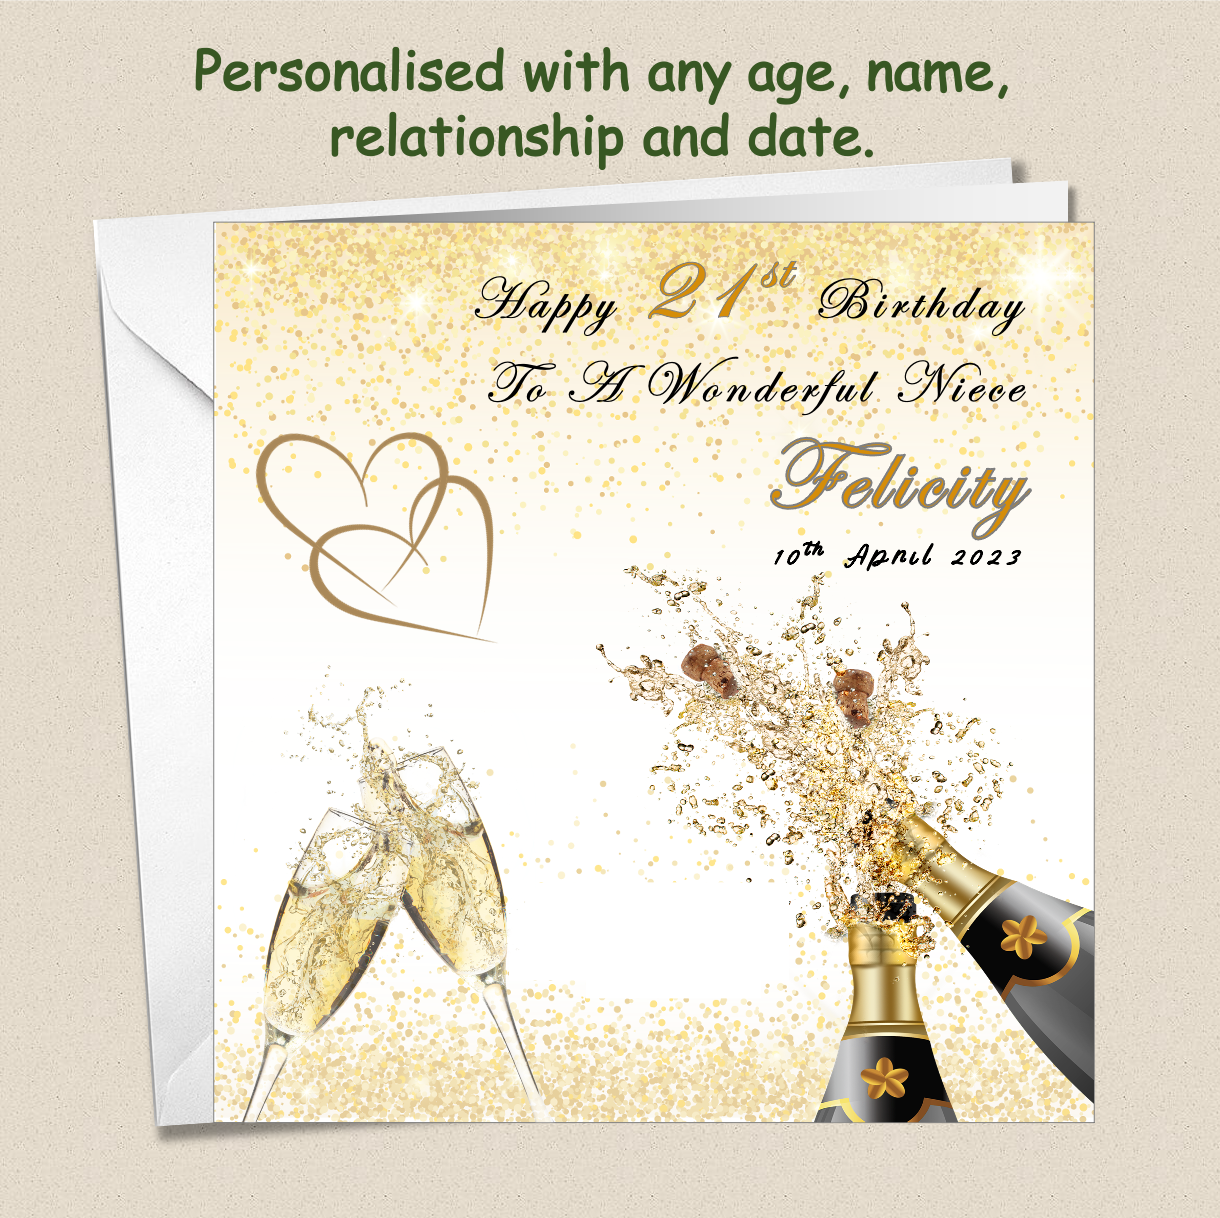 Personalised Champagne Birthday Card - For Her - Cham1